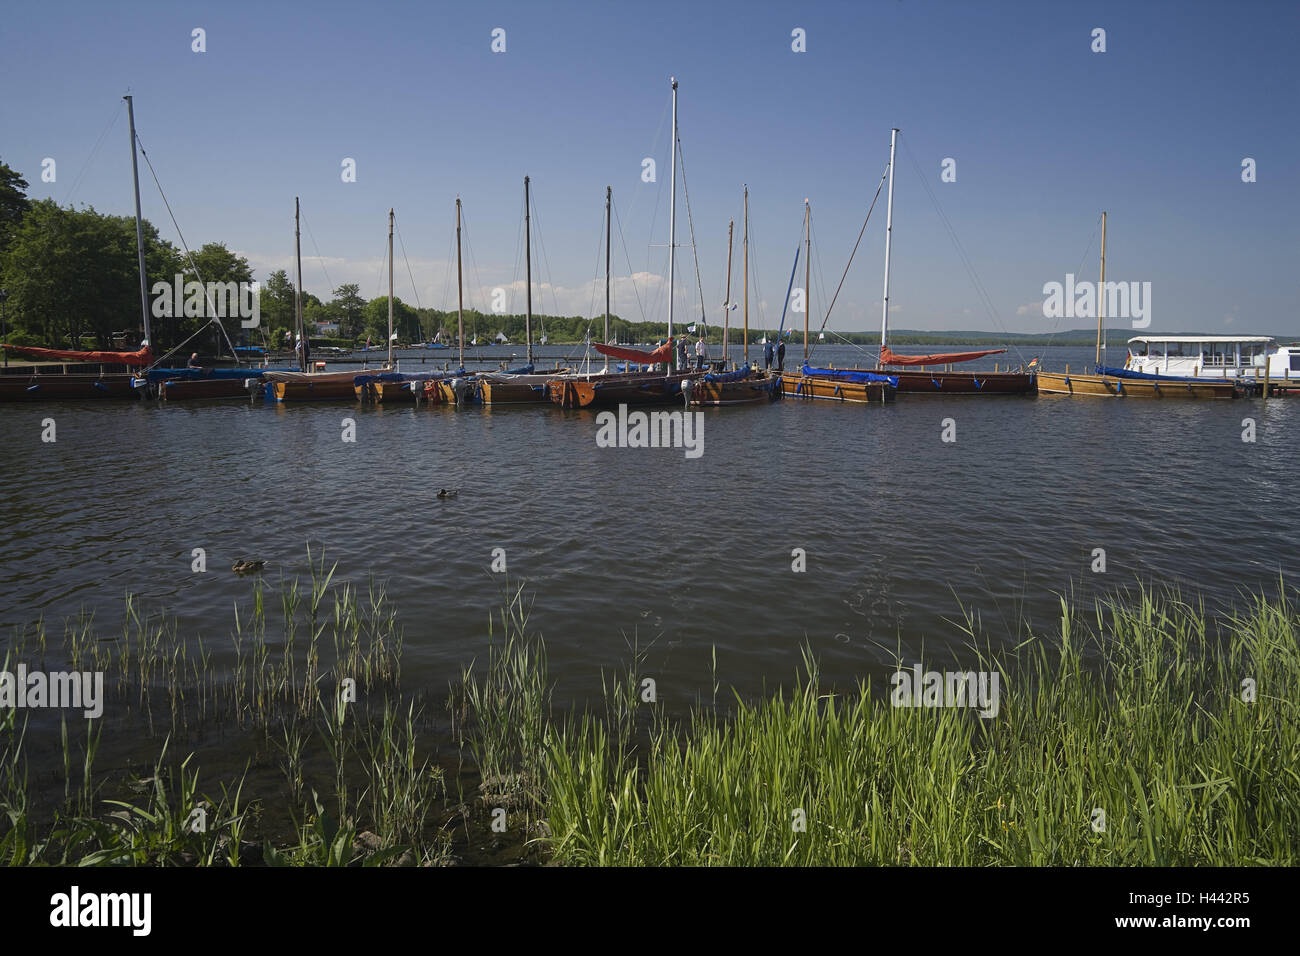 Germany, Lower Saxony, Steinhude, harbour, Steinhuder sea, Wunstorf, part of town, scenery, lake, boots, bridge, sailboats, landing stage, tourism, outside, summer, resort, inland lake, nature reserve, Stock Photo